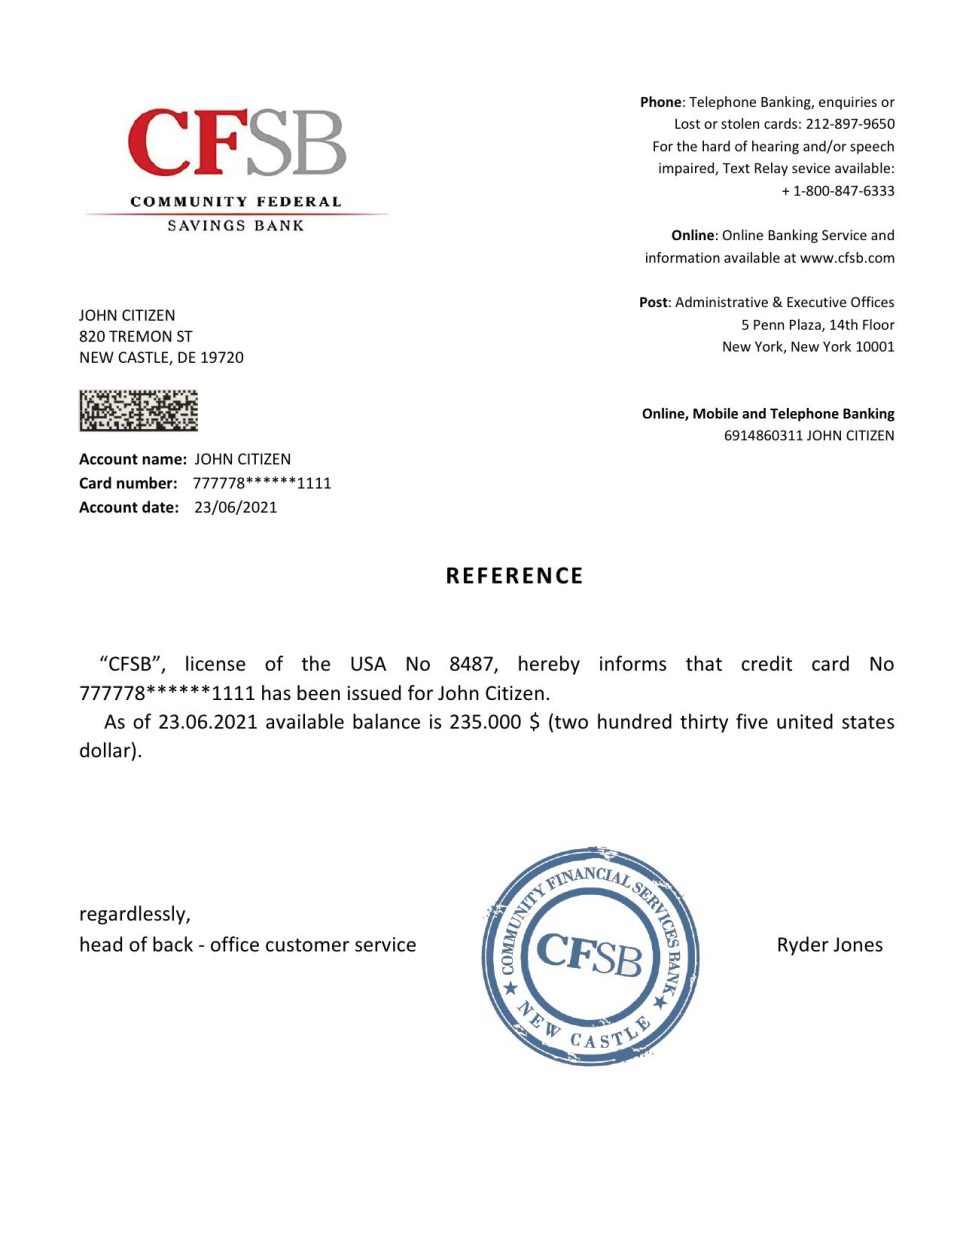 Download USA CFSB Bank Reference Letter Templates | Editable Word